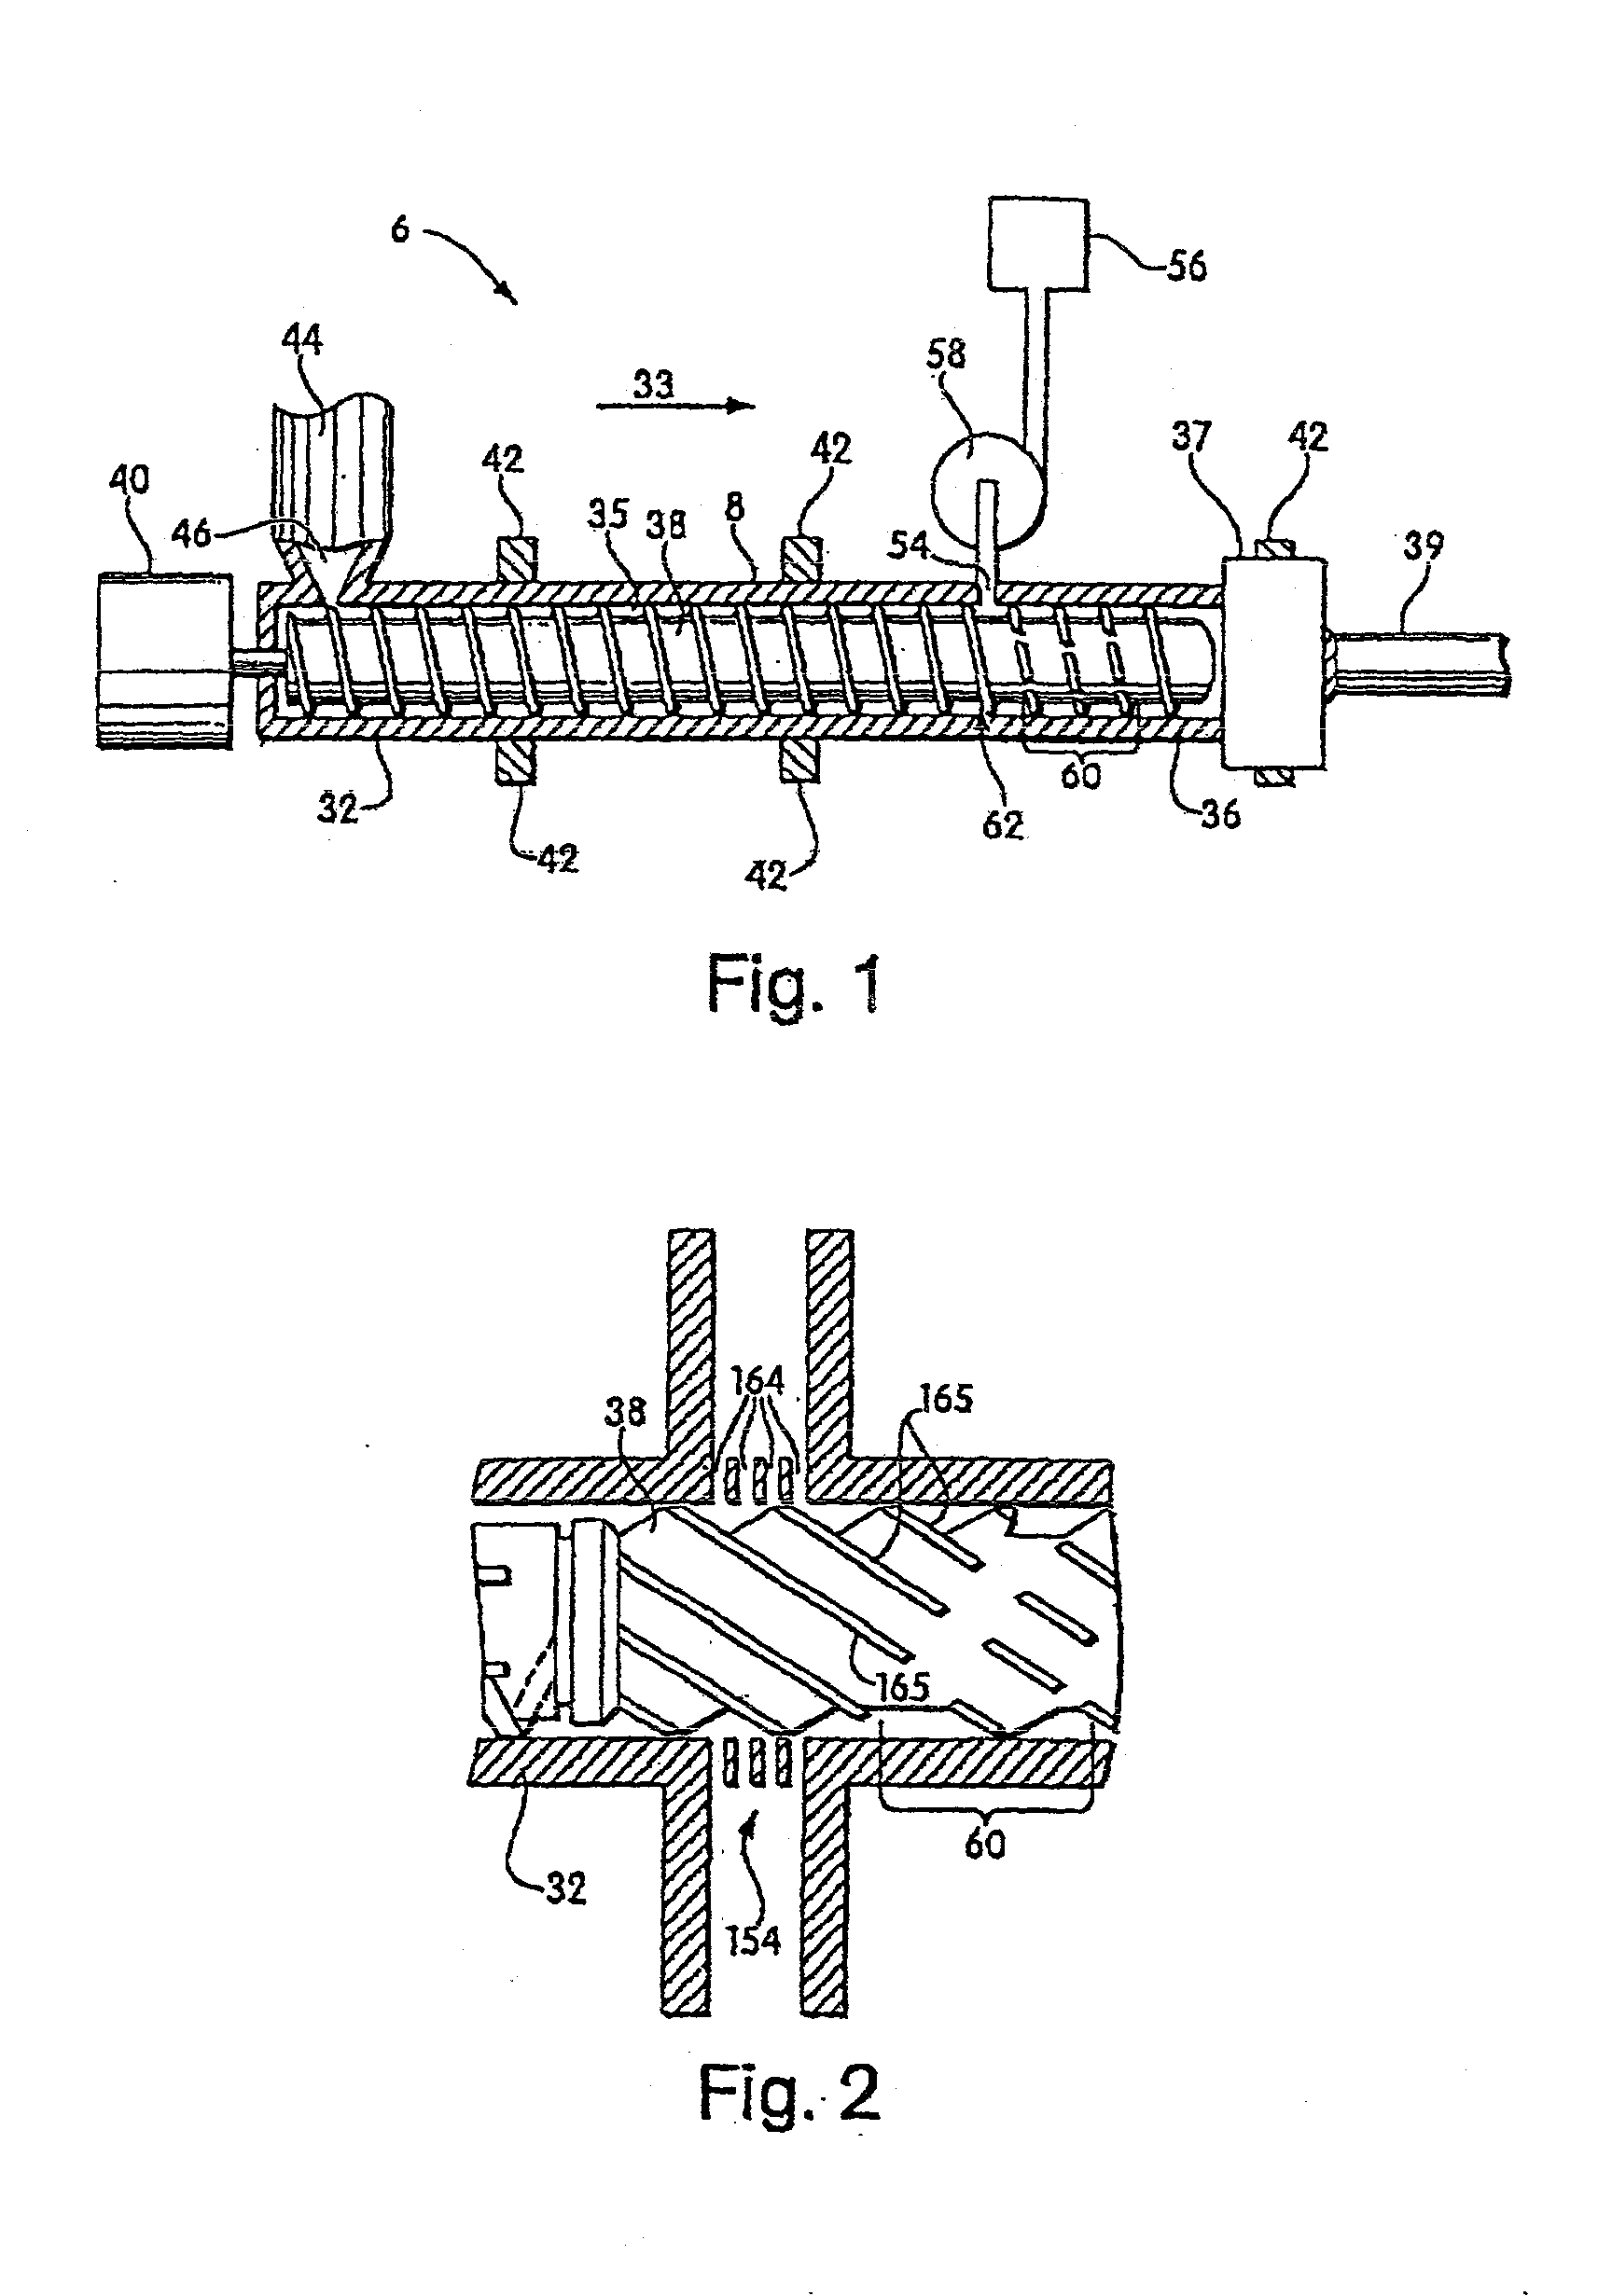 Thermoplastic elastomeric foam materials and methods of forming the same